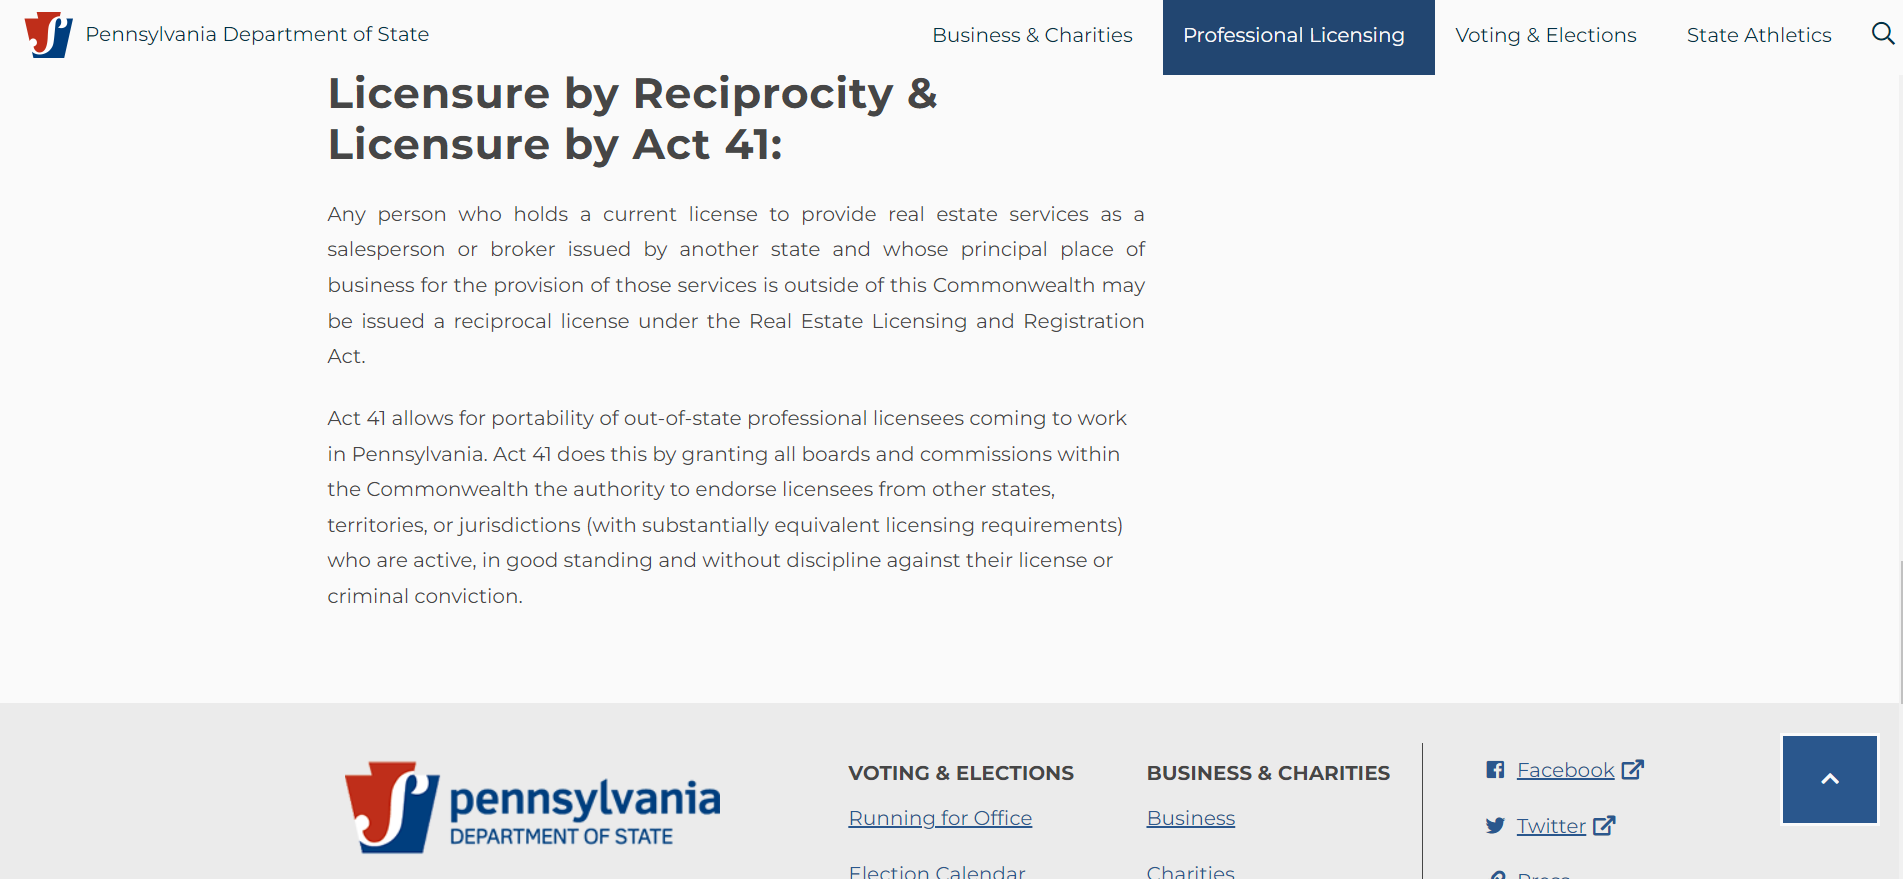 Pennsylvania Department of State website talking about Licensure by Reciprocity.